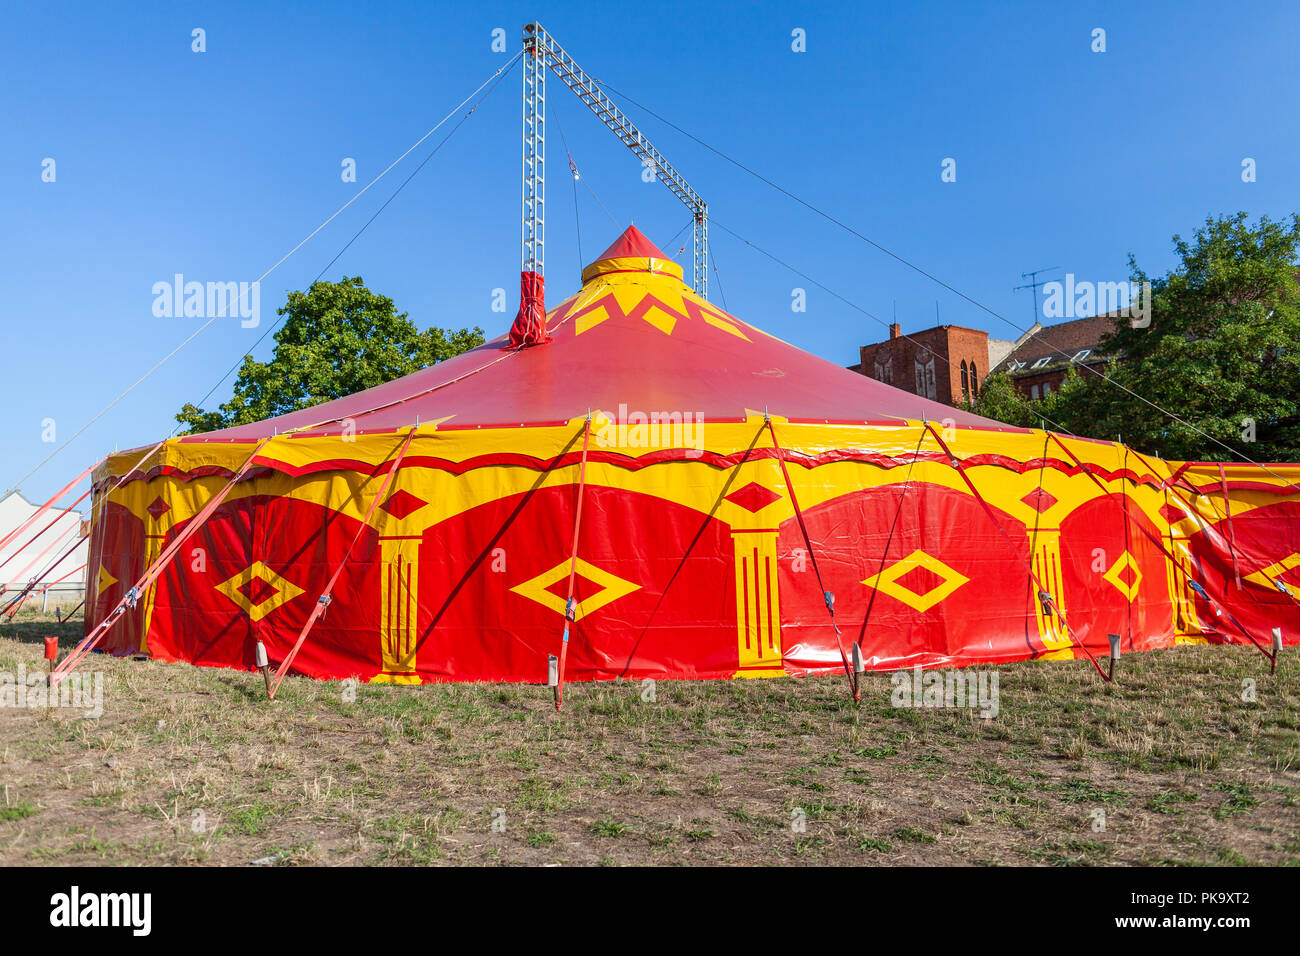 Circus tent in red and yellow colors Stock Photo